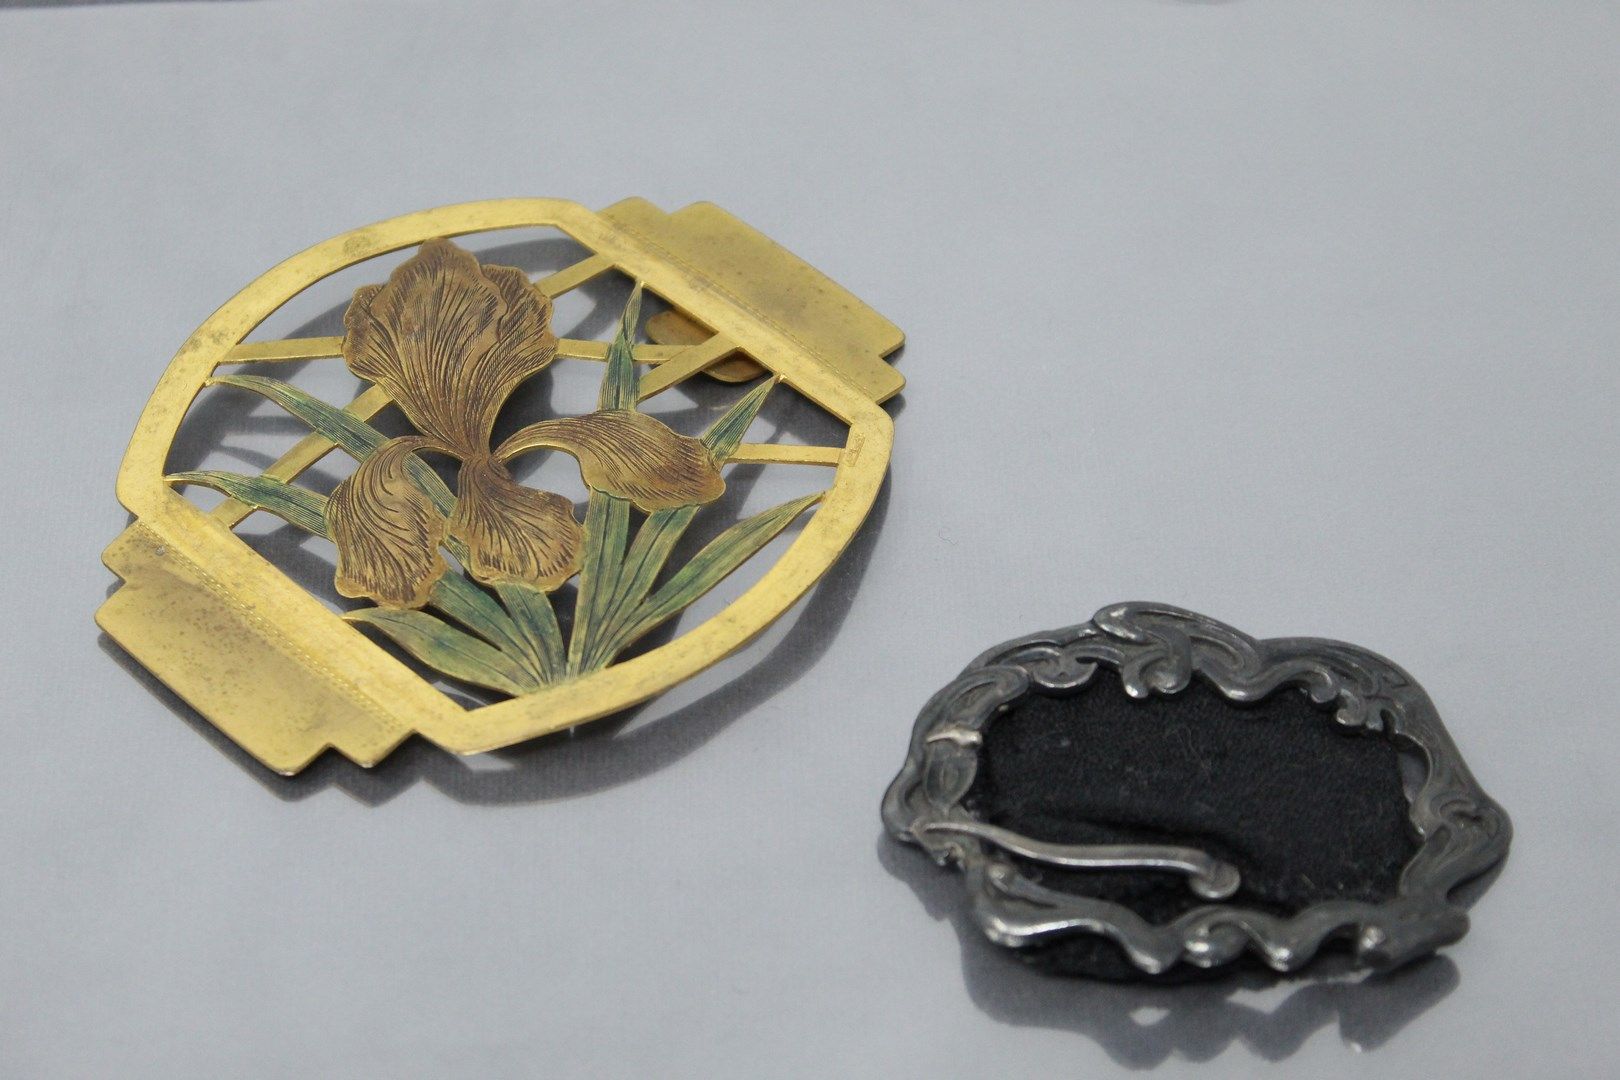 Null Set of two belt buckles in the Art Nouveau style.